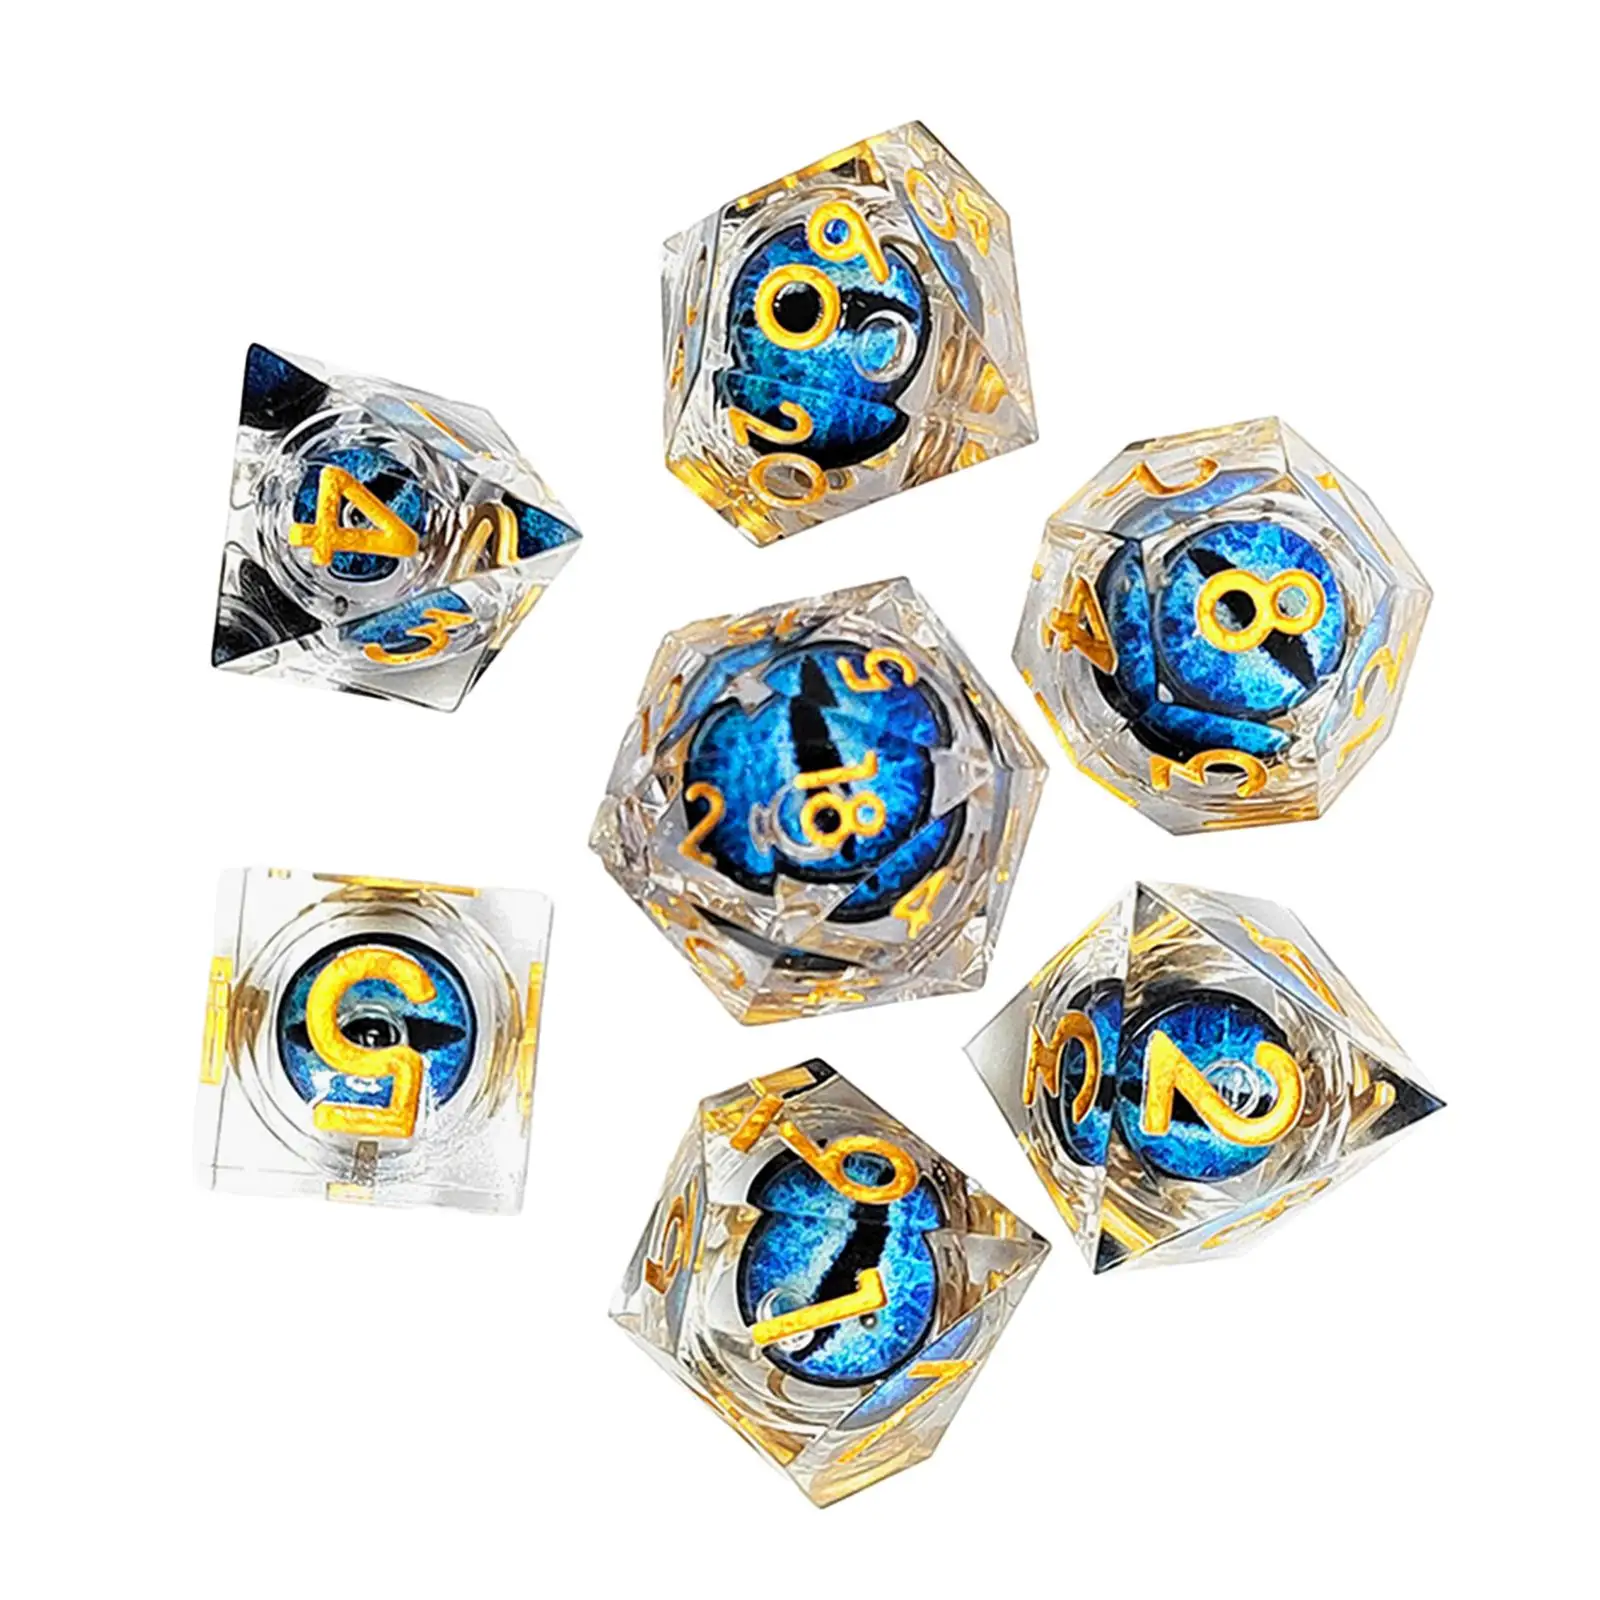 Resin Polyhedral Eye Dice 7Pcs Set Collection for Interactive Games